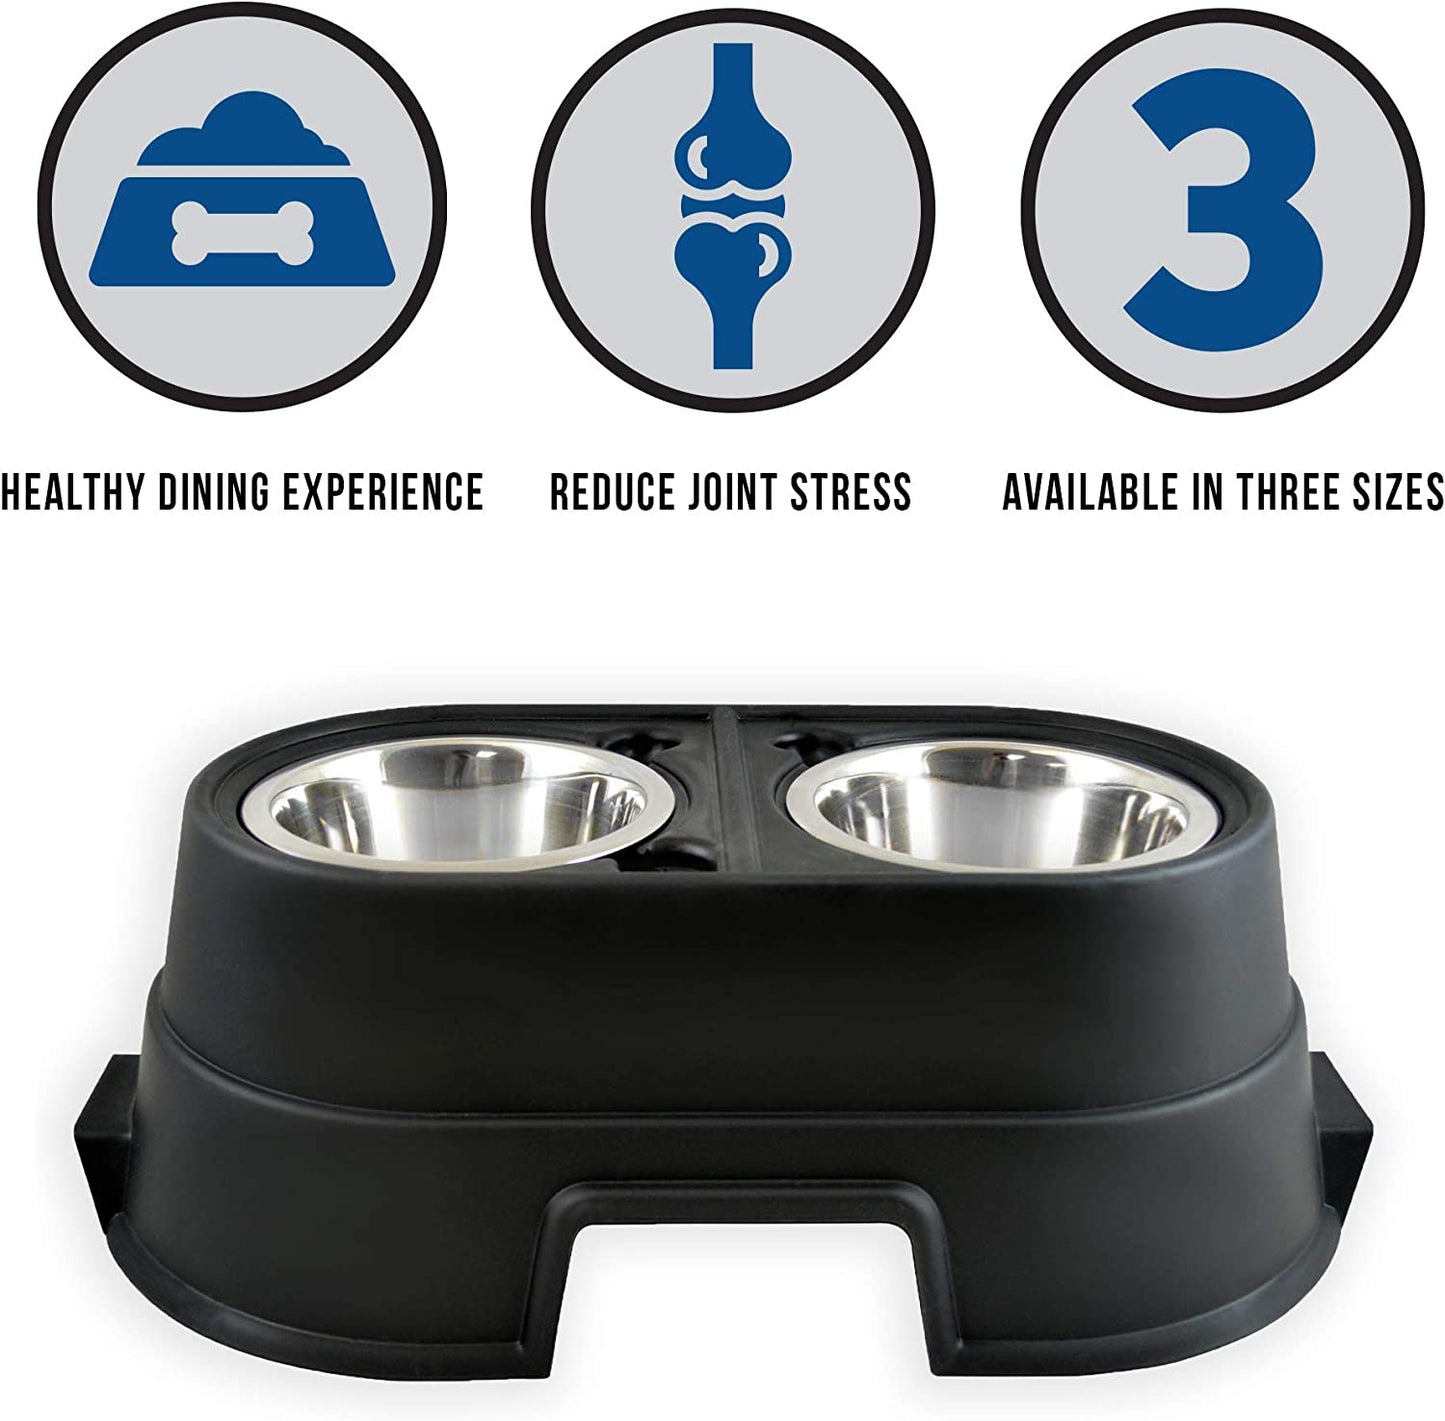 Ourpets Comfort Diner Elevated Dog Food Dish (Raised Dog Bowls Available in 4 Inches, 8 Inches and 12 Inches for Large Dogs, Medium Dogs and Small Dogs), 8-Inch